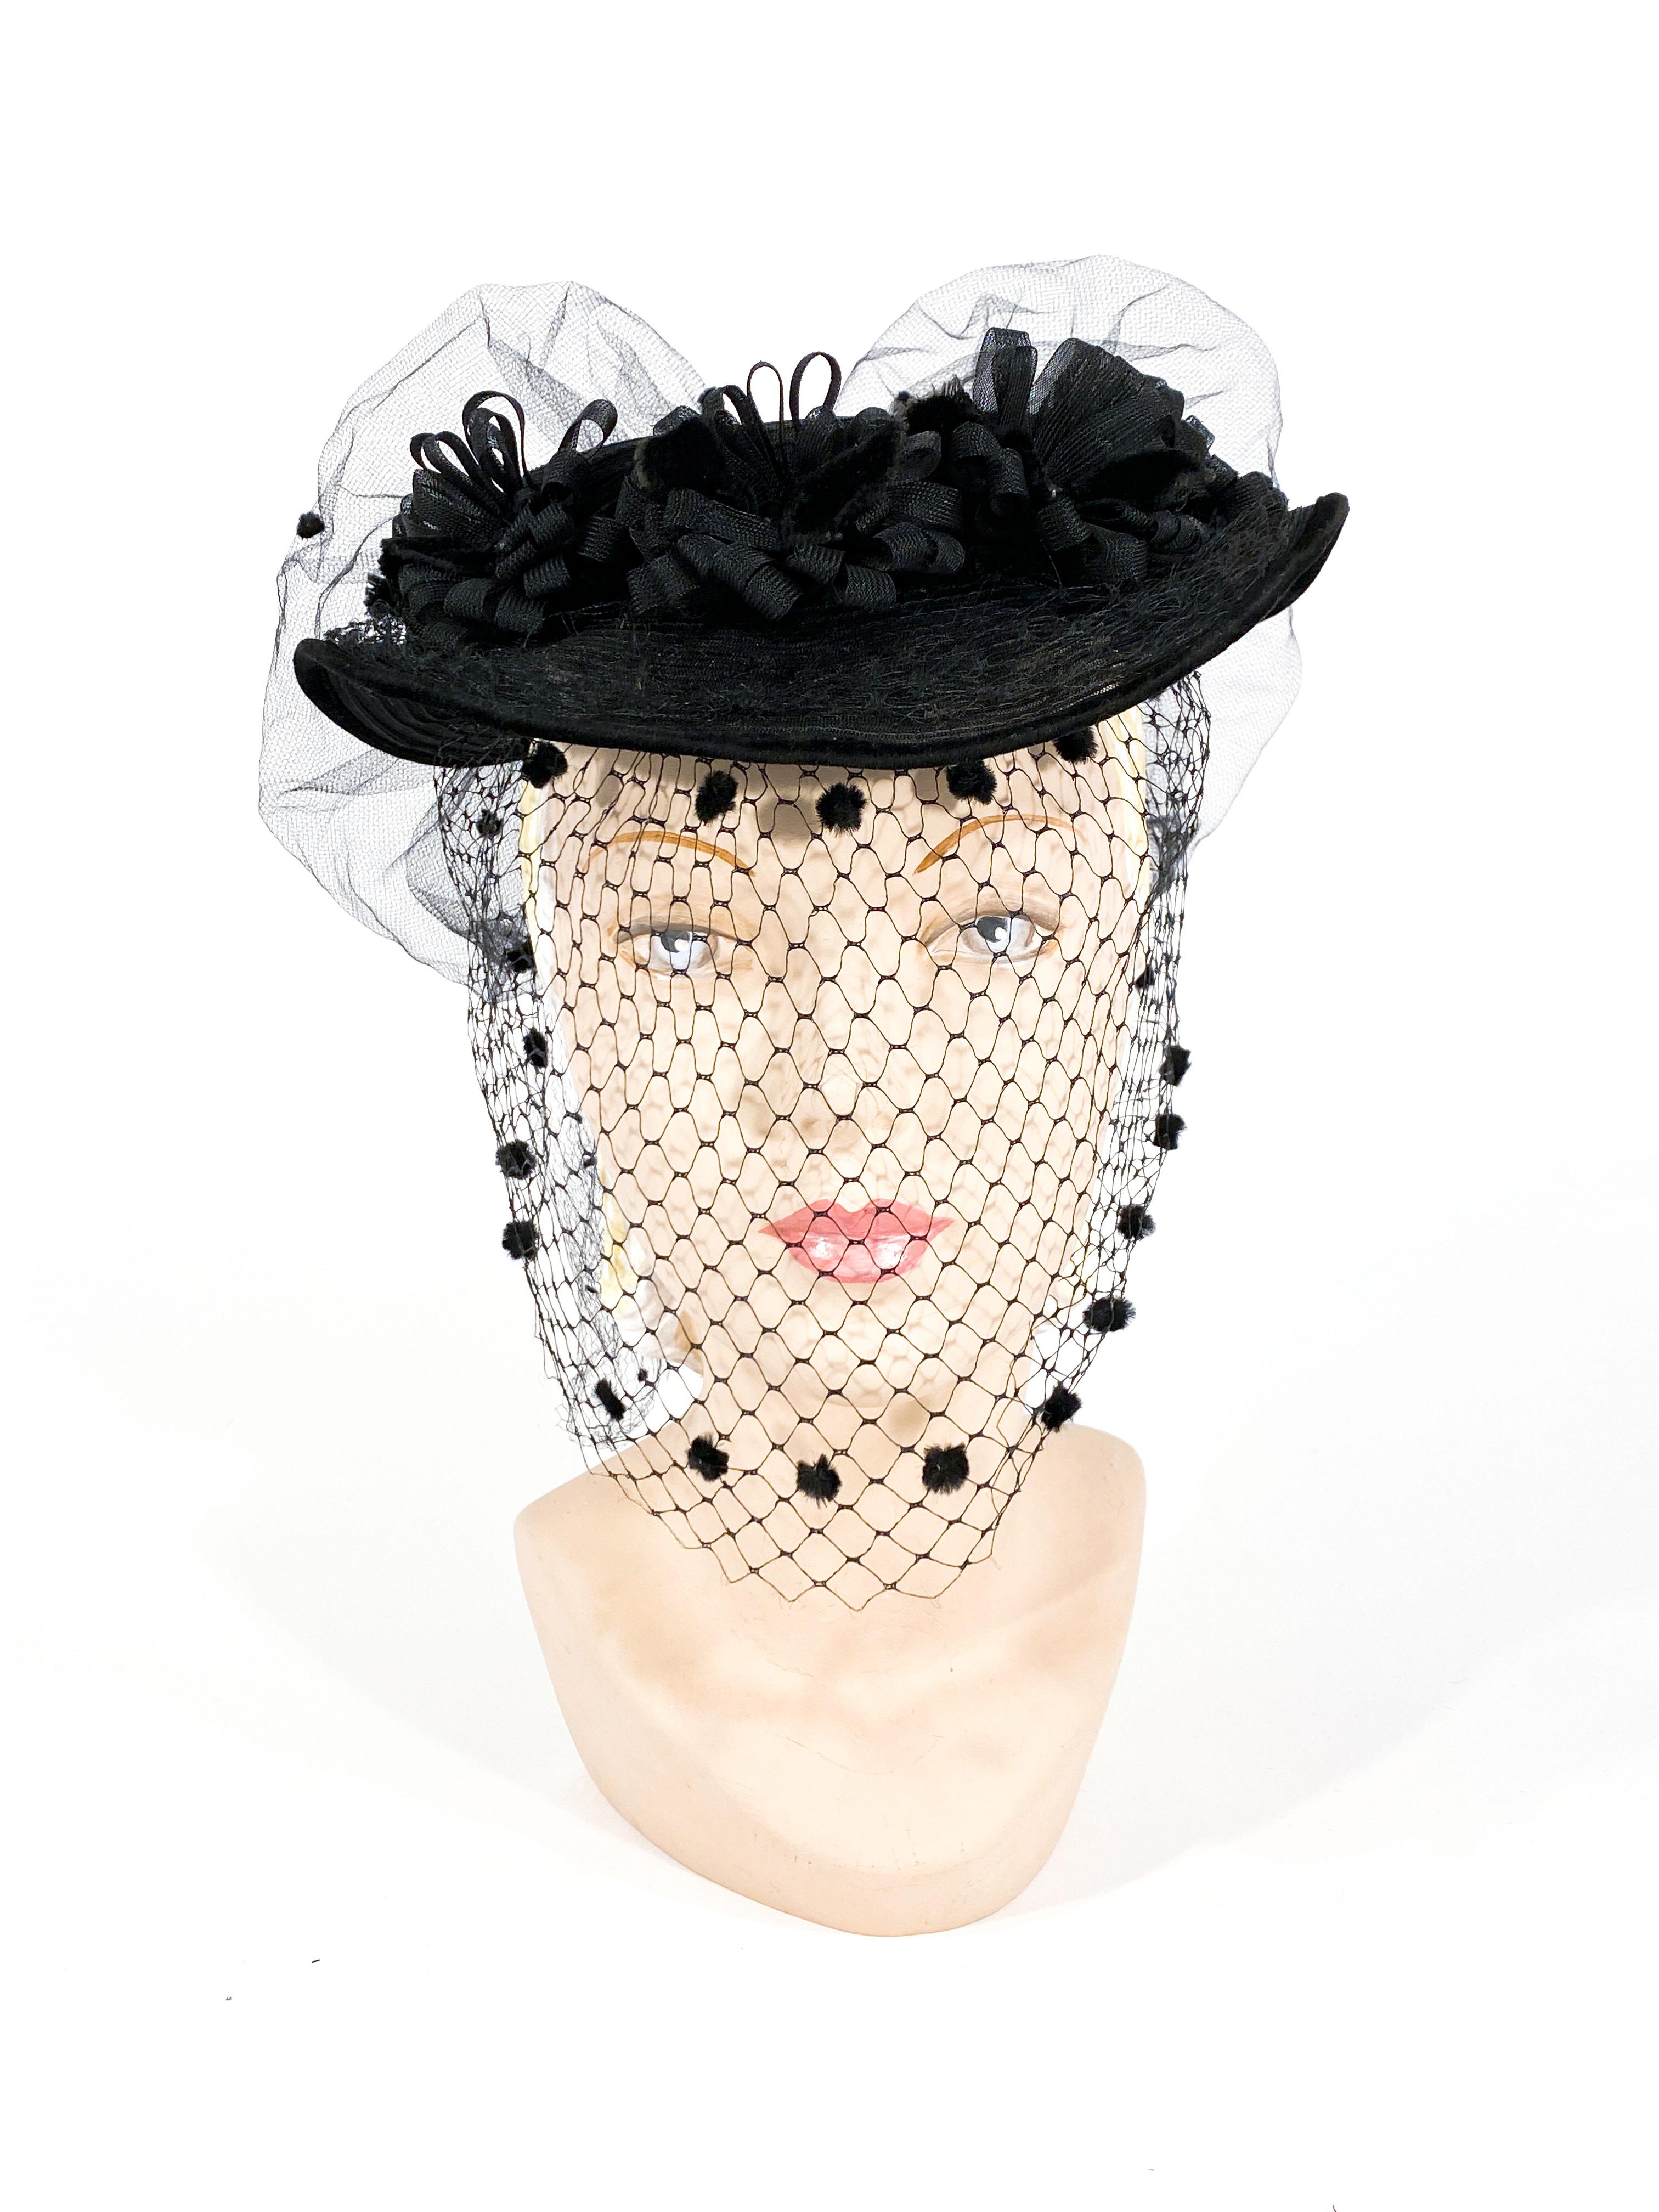 1940s black horse woven horse had sculpted hat with looped horsehair flower and a tilted brim. The black full-face veil is decorated with velvet dots at the very top of the head and under the chin to frame the face. The hat is finished with a large